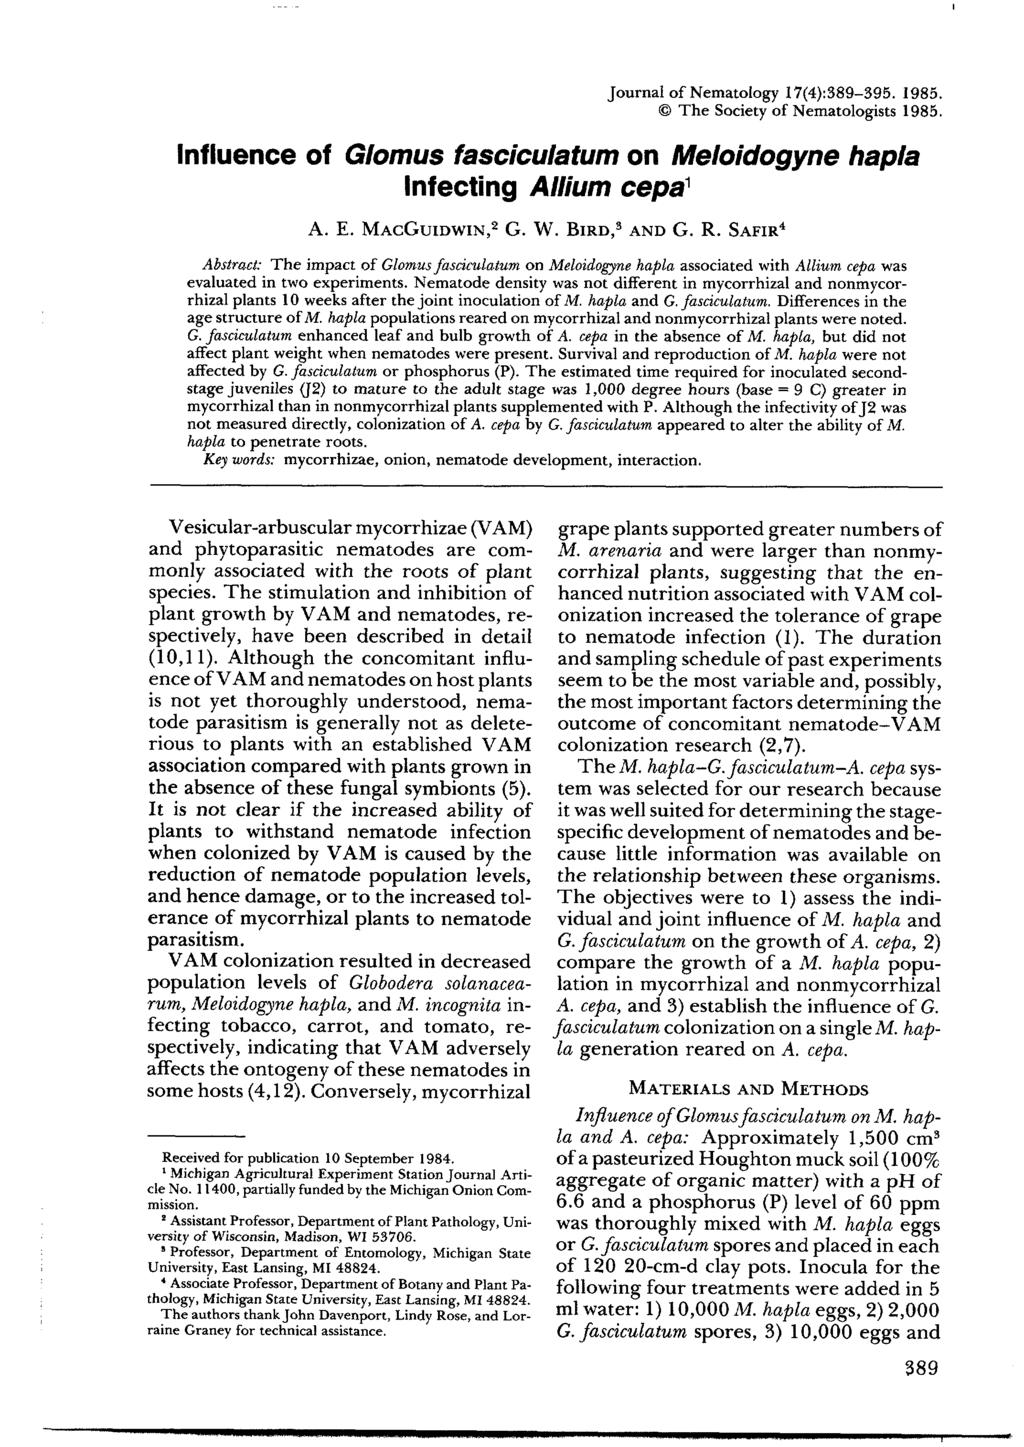 Journal of Nematology 17(4):389-395. 1985. The Society of Nematologists 1985. Influence of Glomus fasciculatum on Meloidogyne hapla Infecting Allium cepa 1 A. E. MAcGuIDWIN, 2 G. W. BIRD, s AND G. R.